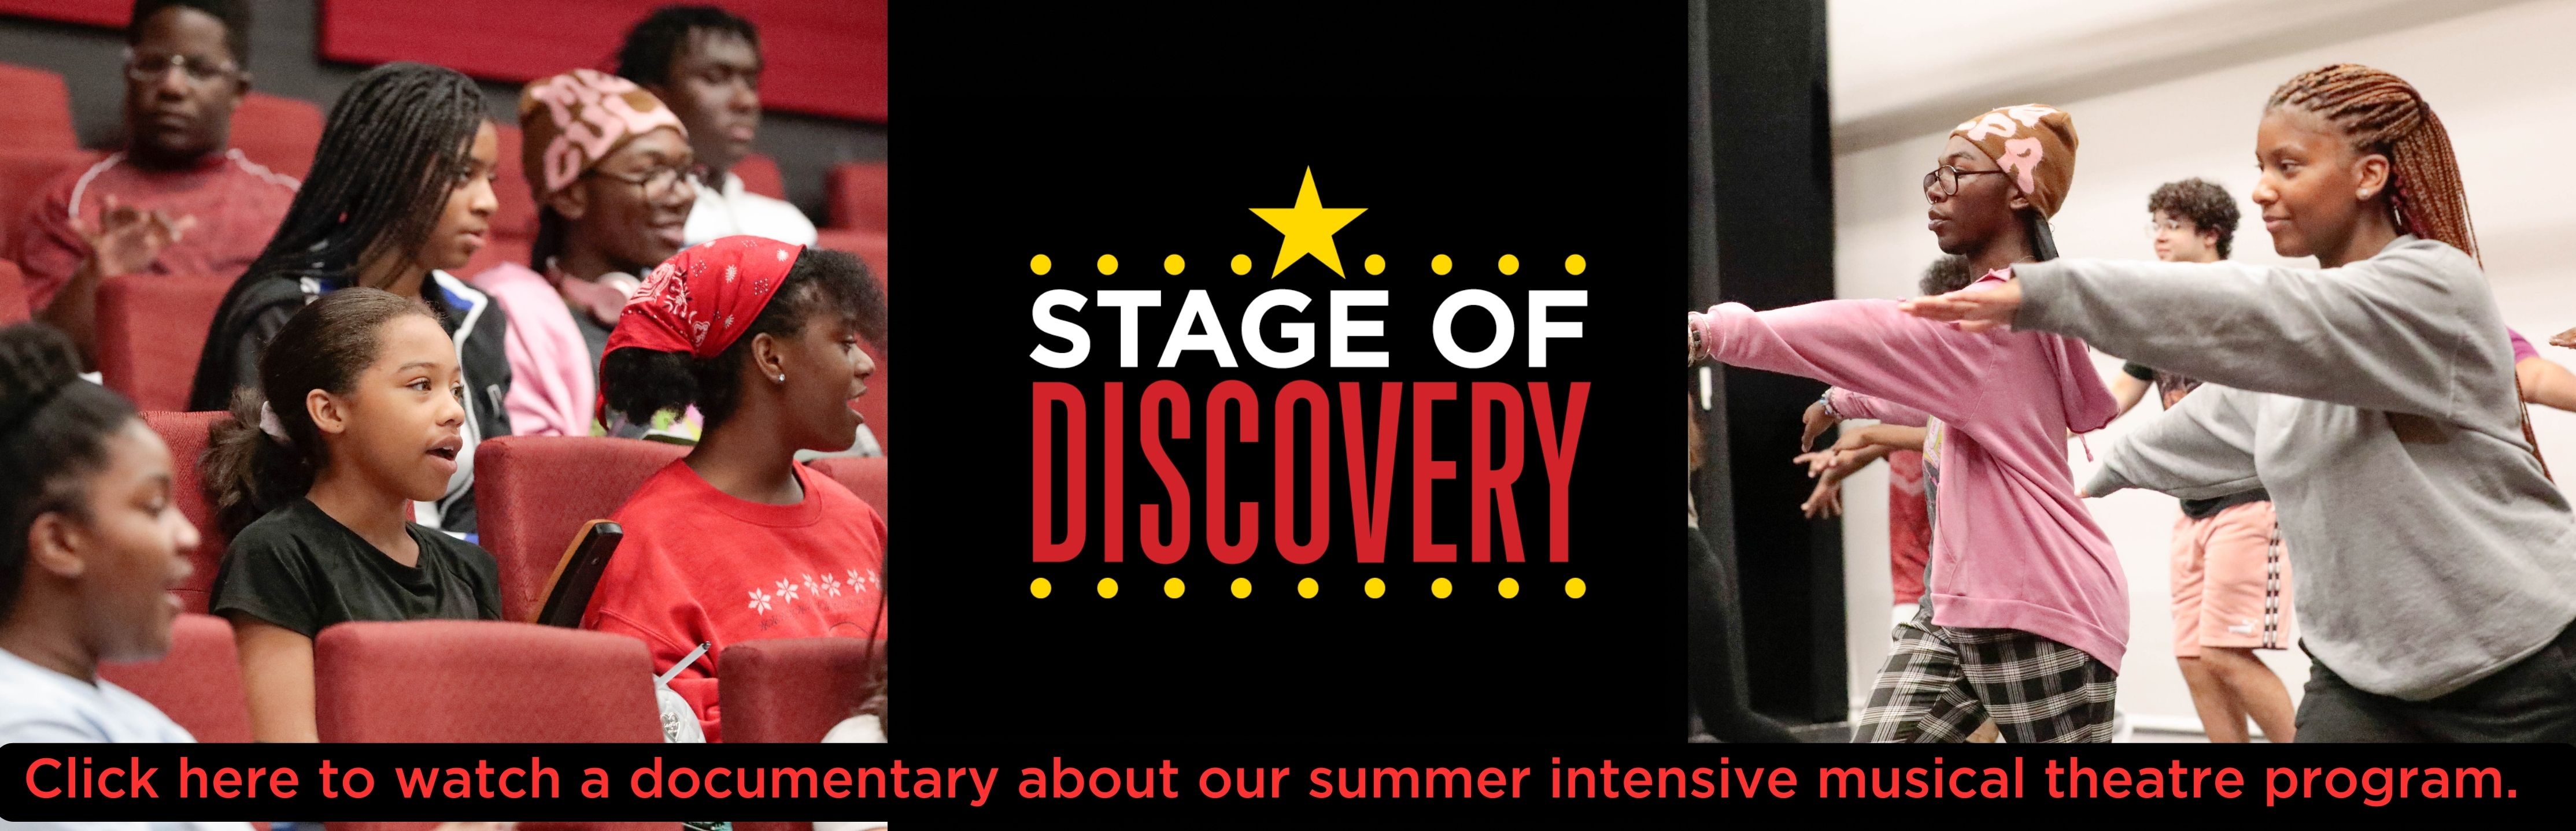 Stage of Discovery Documentary